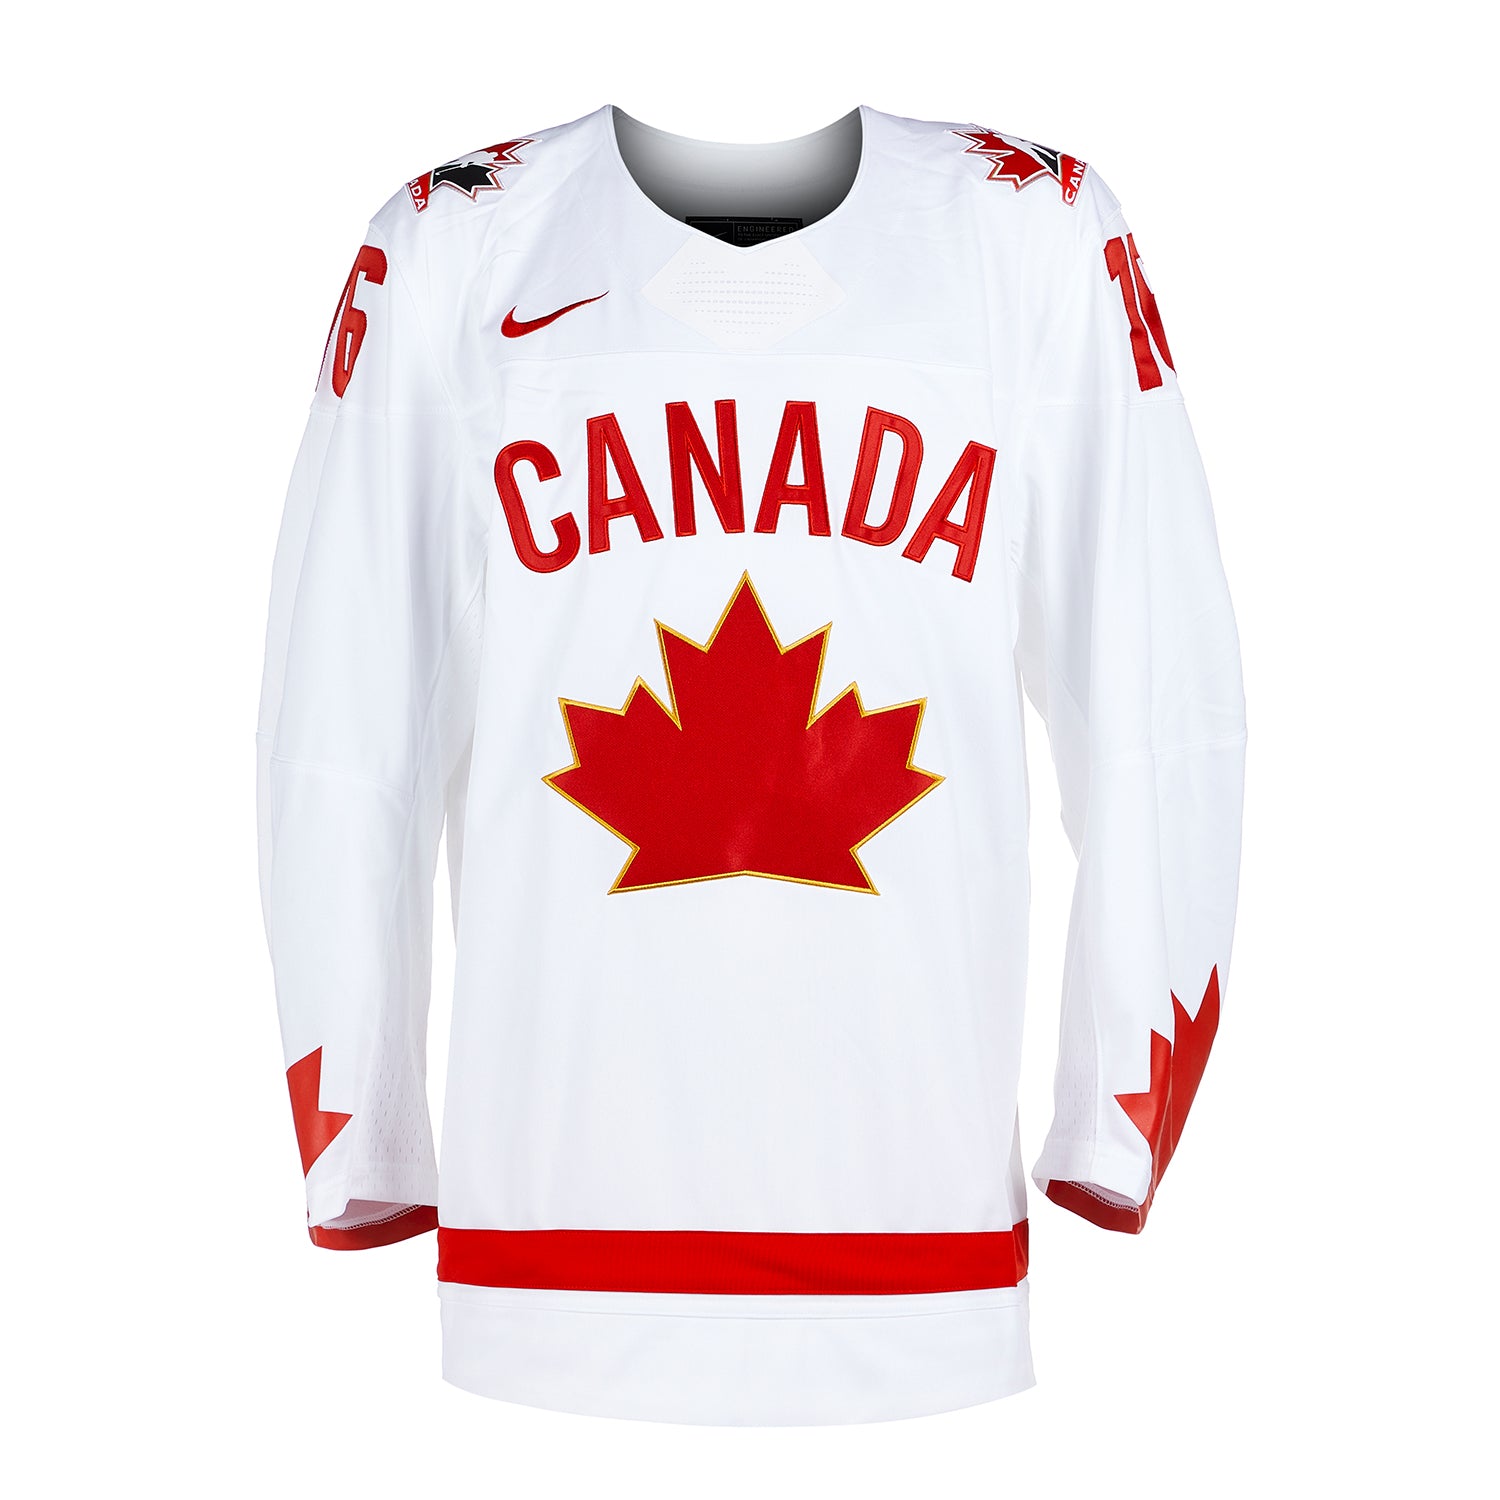 Connor Bedard Signed Team Canada White Hockey Jersey 656874500964